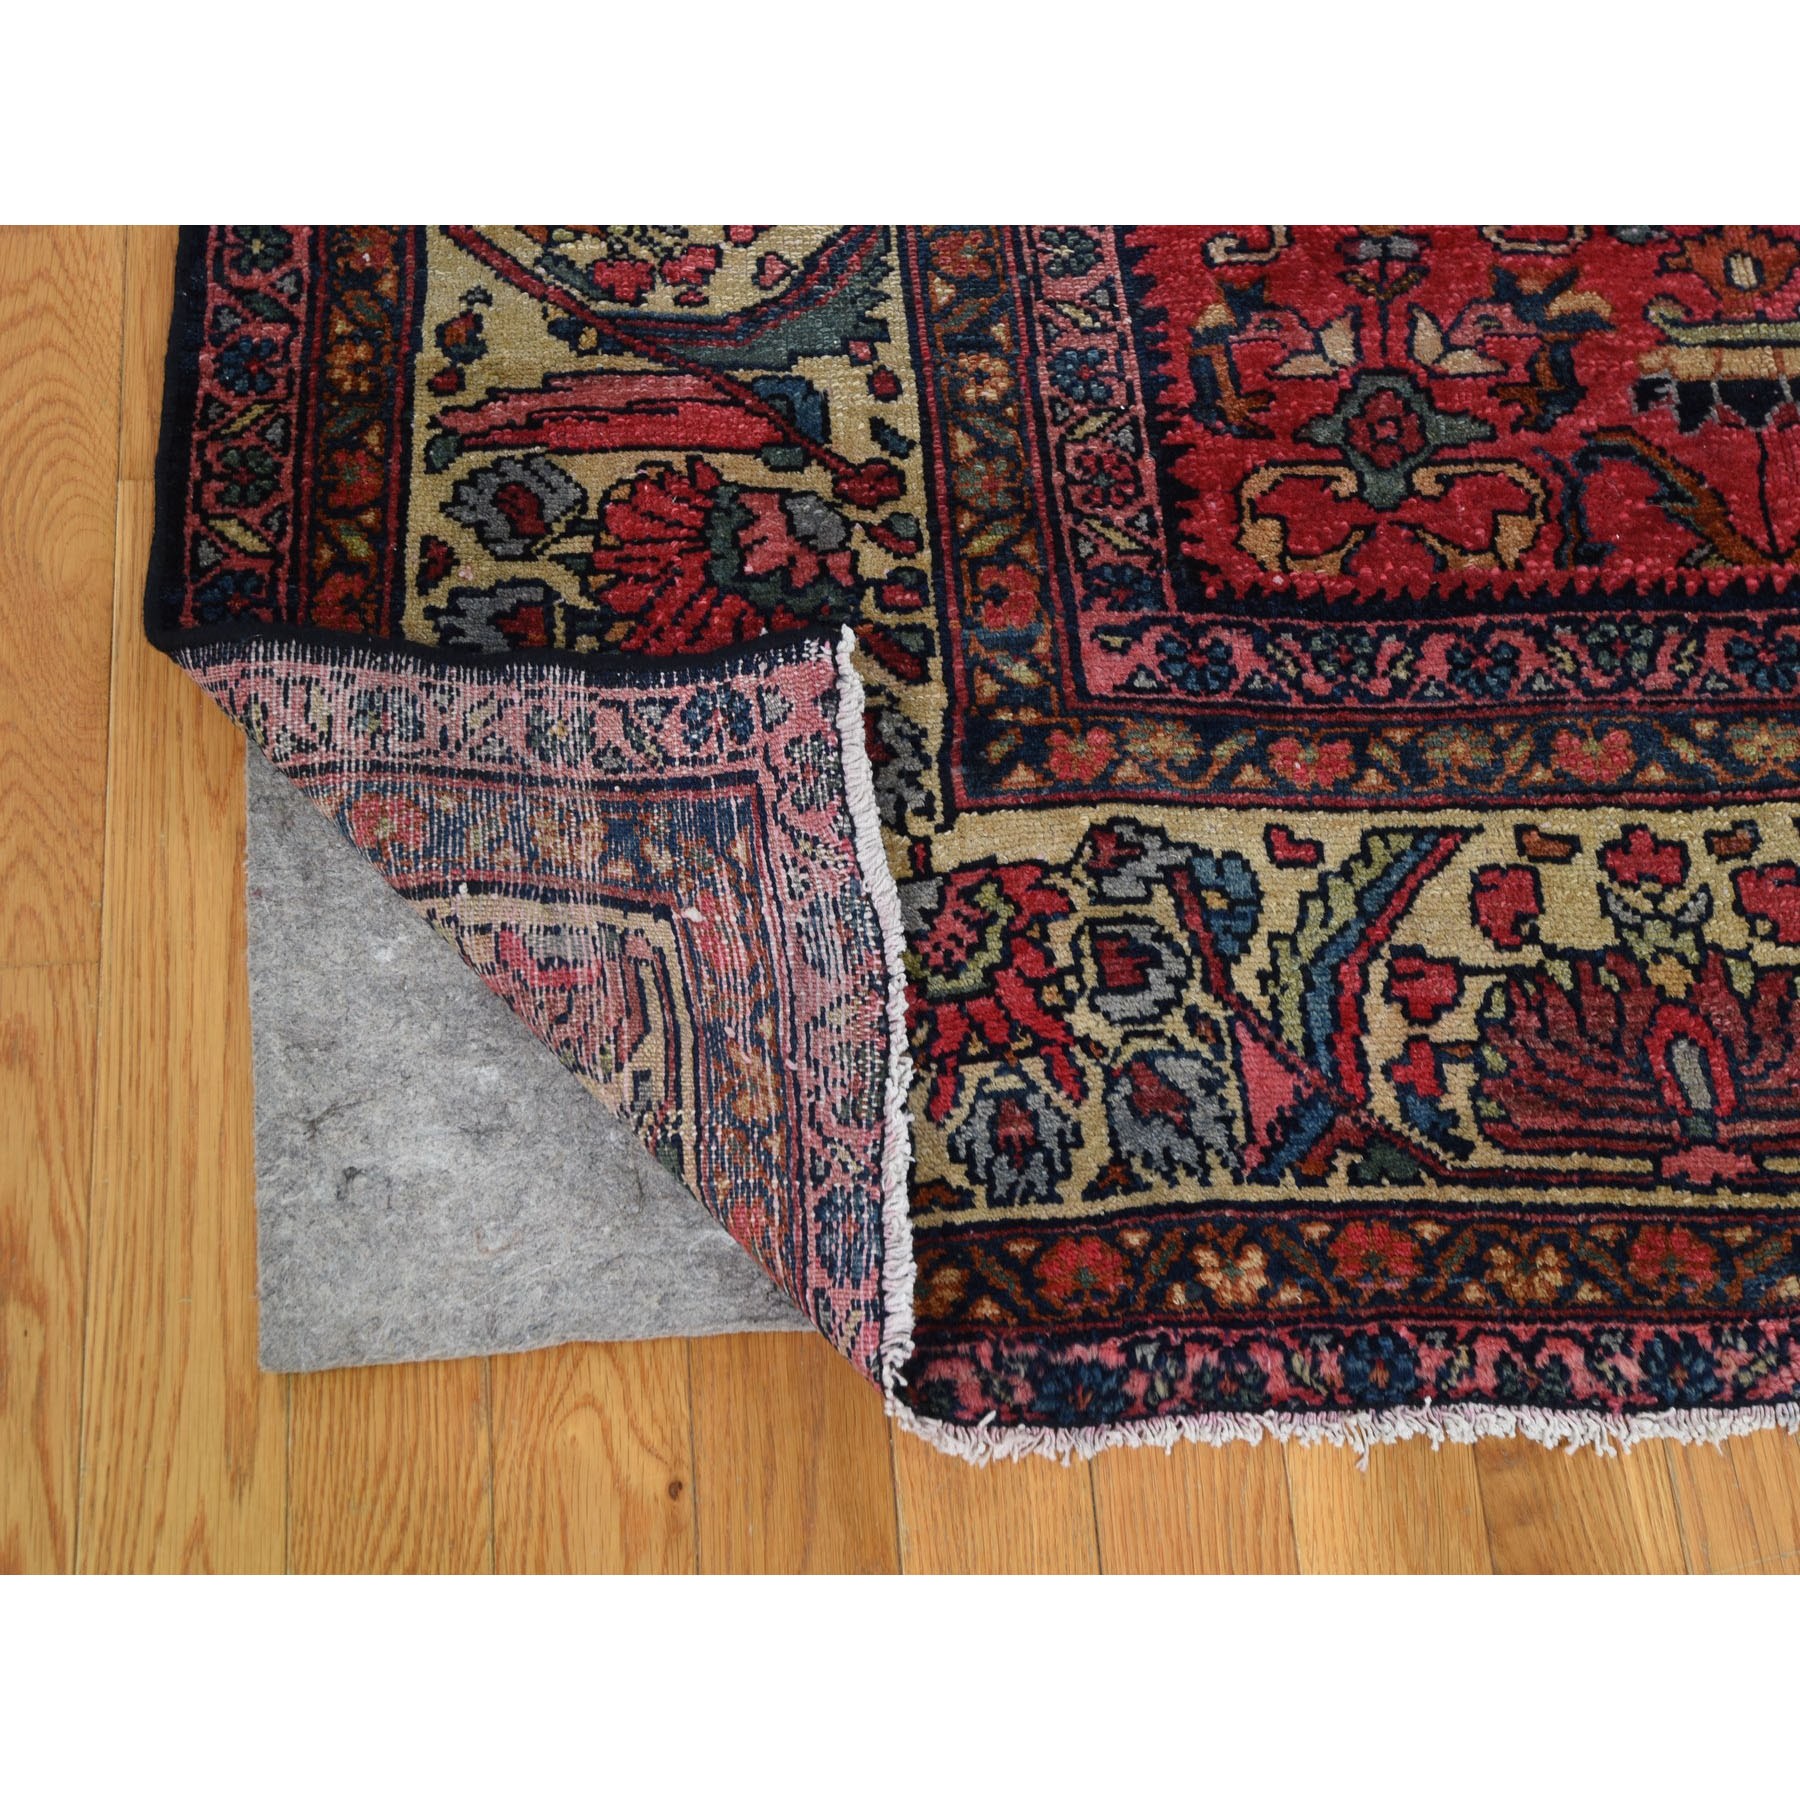 7-10 x10-9  Antique Persian Lilahan Even Wear Good Condition Hand Knotted Oriental Rug 